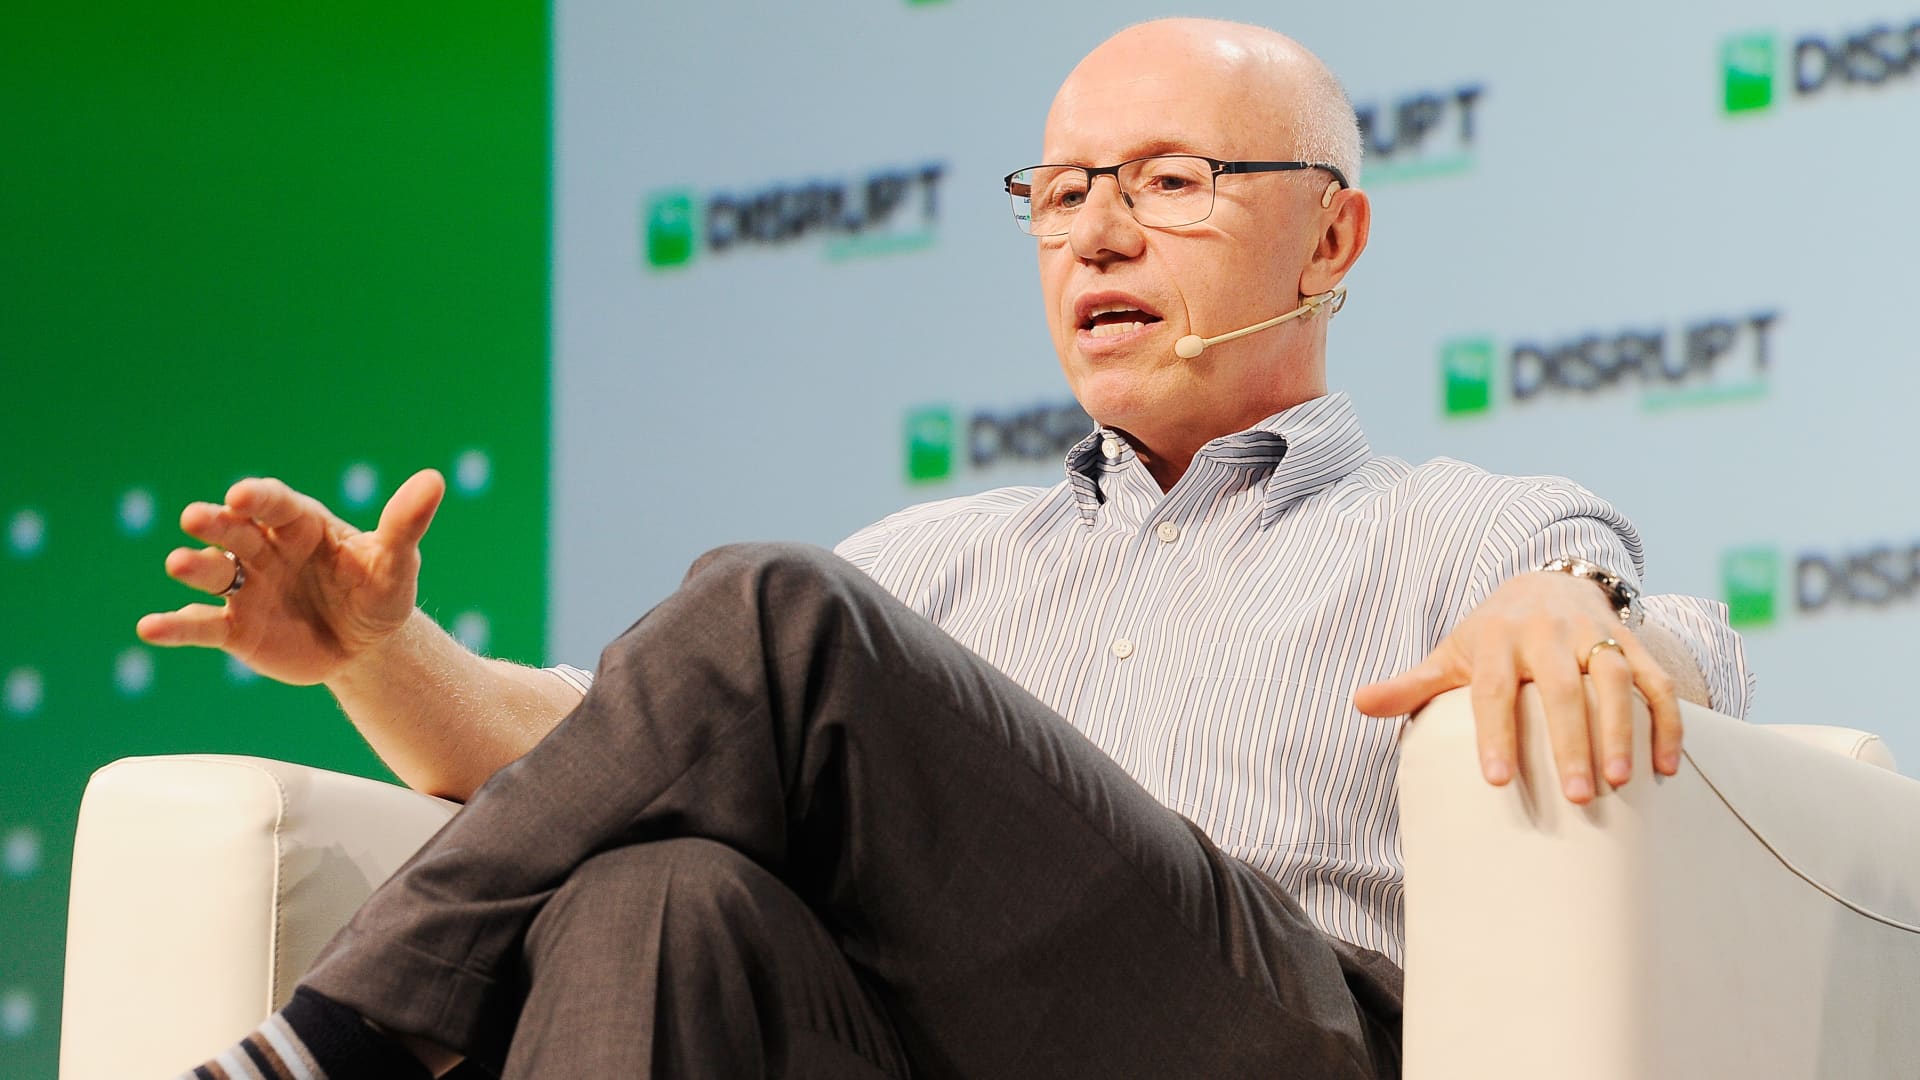 Sequoia Capital Global Managing Partner Doug Leone speaks onstage during Day 2 of TechCrunch Disrupt SF 2018 at Moscone Center on September 6, 2018 in San Francisco, California.